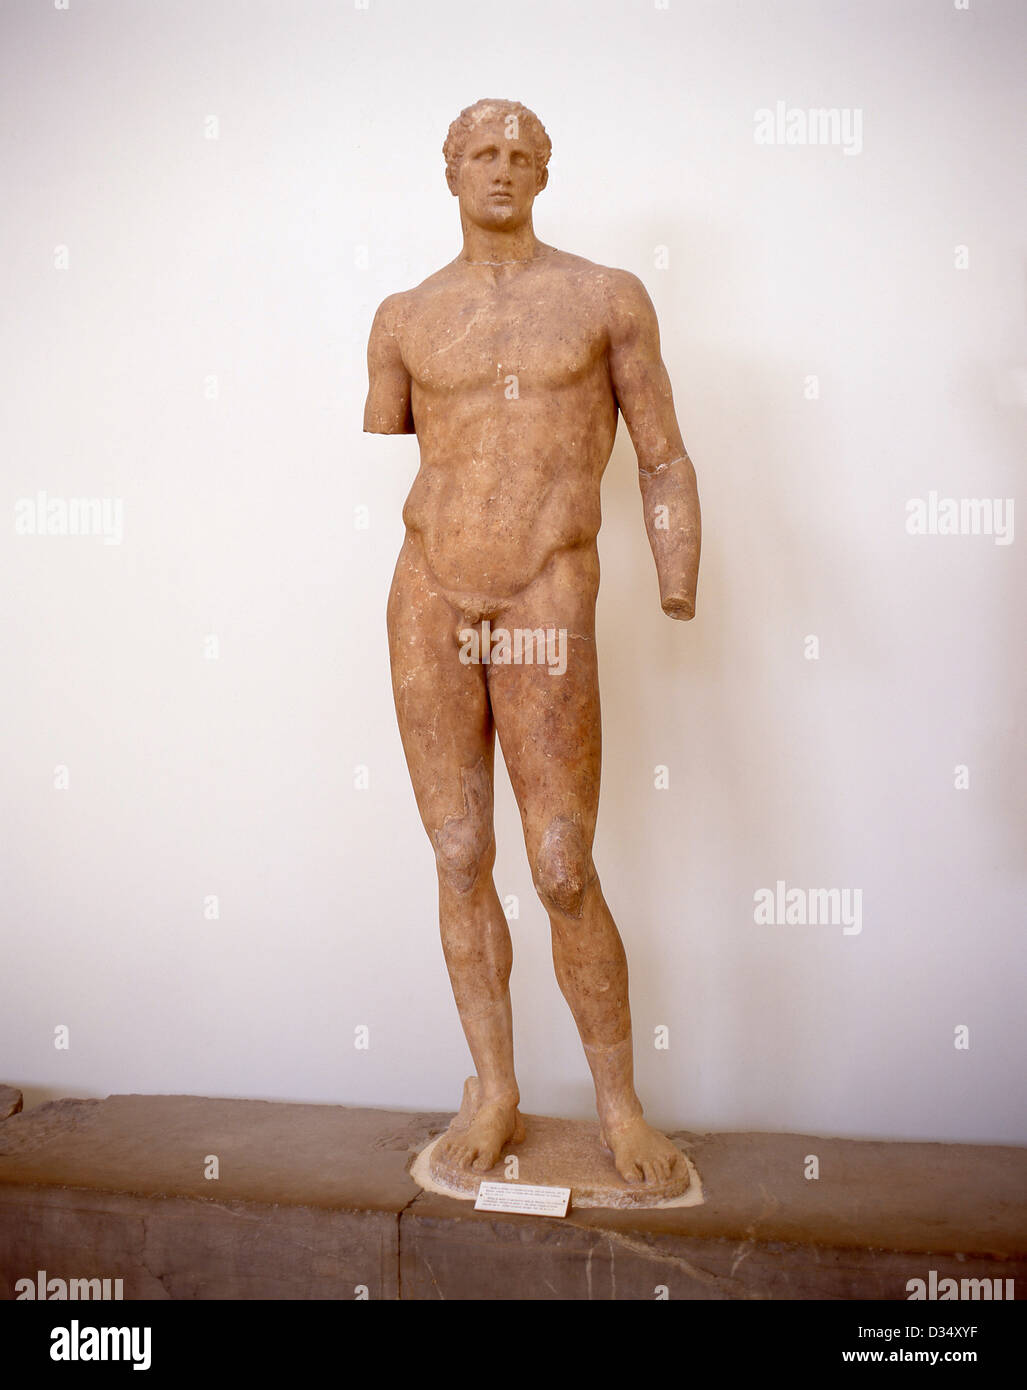 Agias olympic athlete statue (330BC) in Delphi Archaeological Museum, Delphi, Mount Parnassus, Central Greece Region, Greece Stock Photo